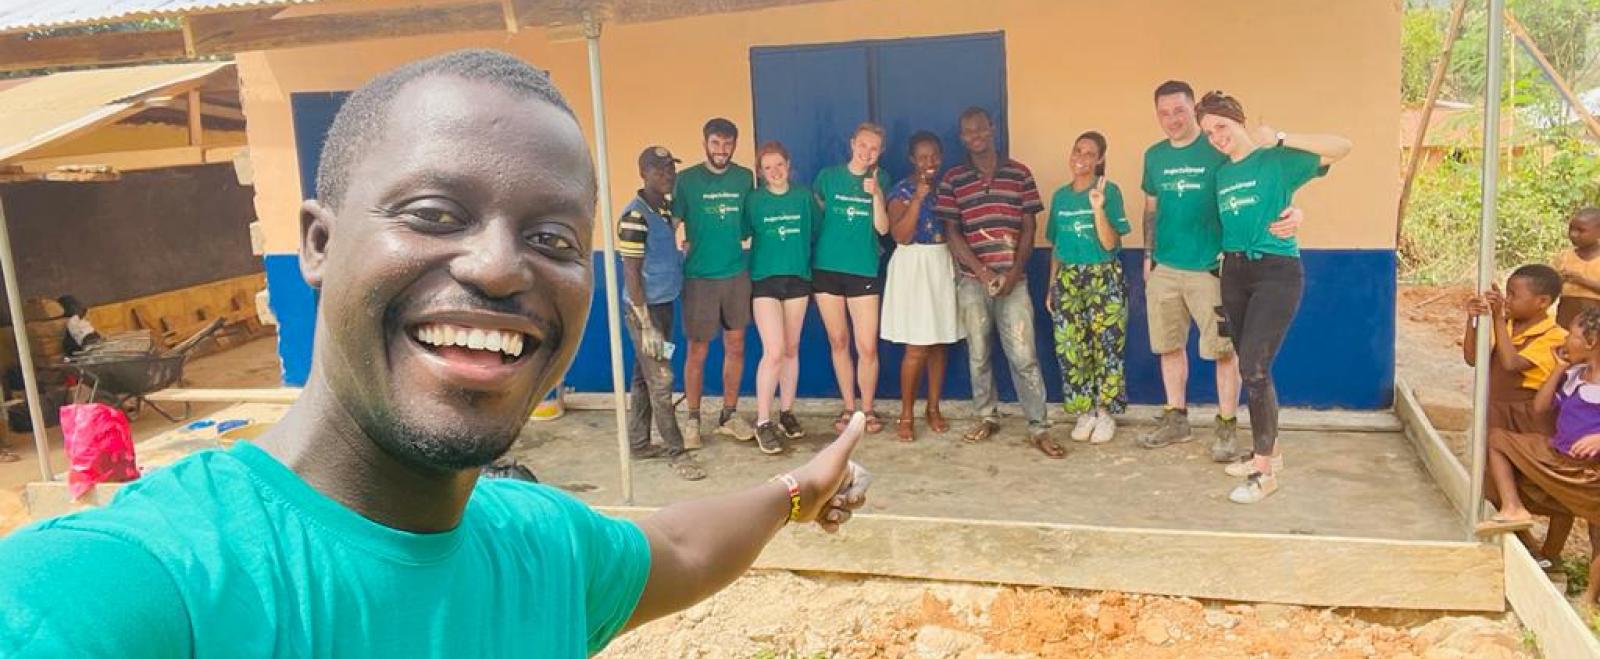 Volunteers outside the newly built classroom in Ghana